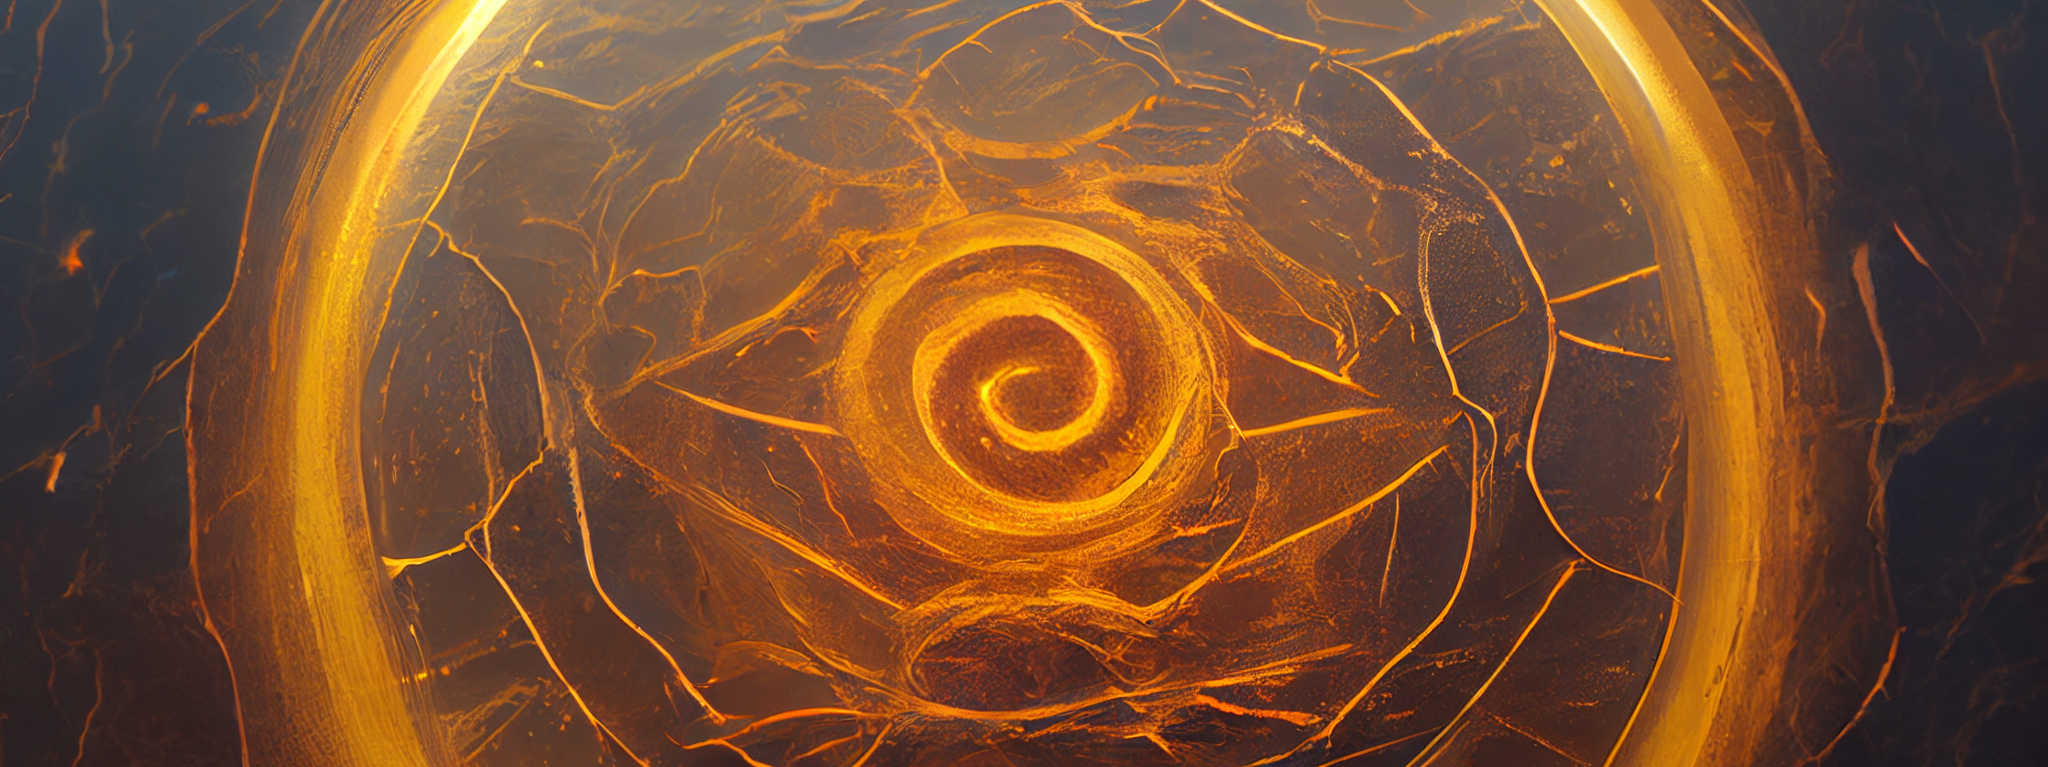 Stylized amber-gold swirl surrounded by ripples within a ring